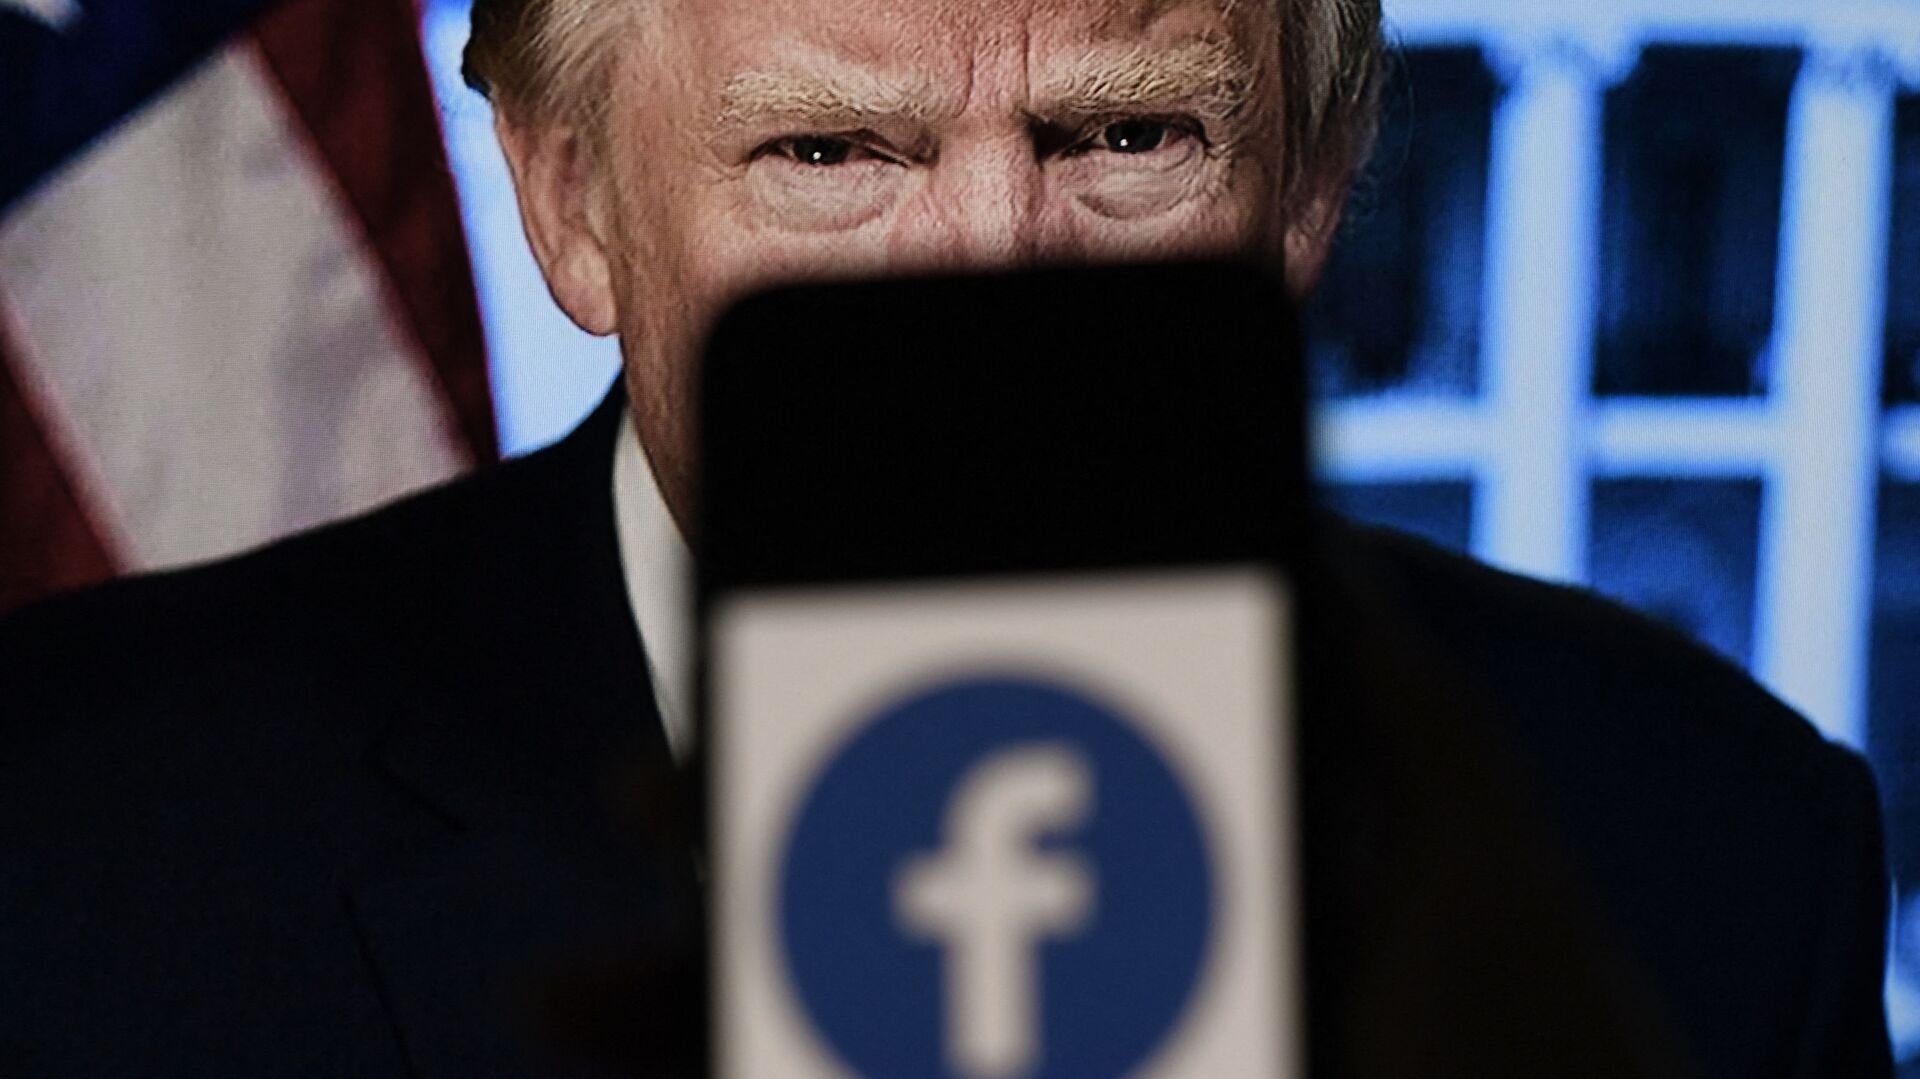 In this photo illustration, a phone screen displays a Facebook logo with the official portrait of former US President Donald Trump on the background, on May 4, 2021, in Arlington, Virginia. - Facebook's independent oversight board was set for a momentous decision on the platform's ban of former US president Donald Trump, as debate swirls on the role of social media in curbing hateful and abusive speech while controlling political discourse. - Sputnik International, 1920, 04.05.2021